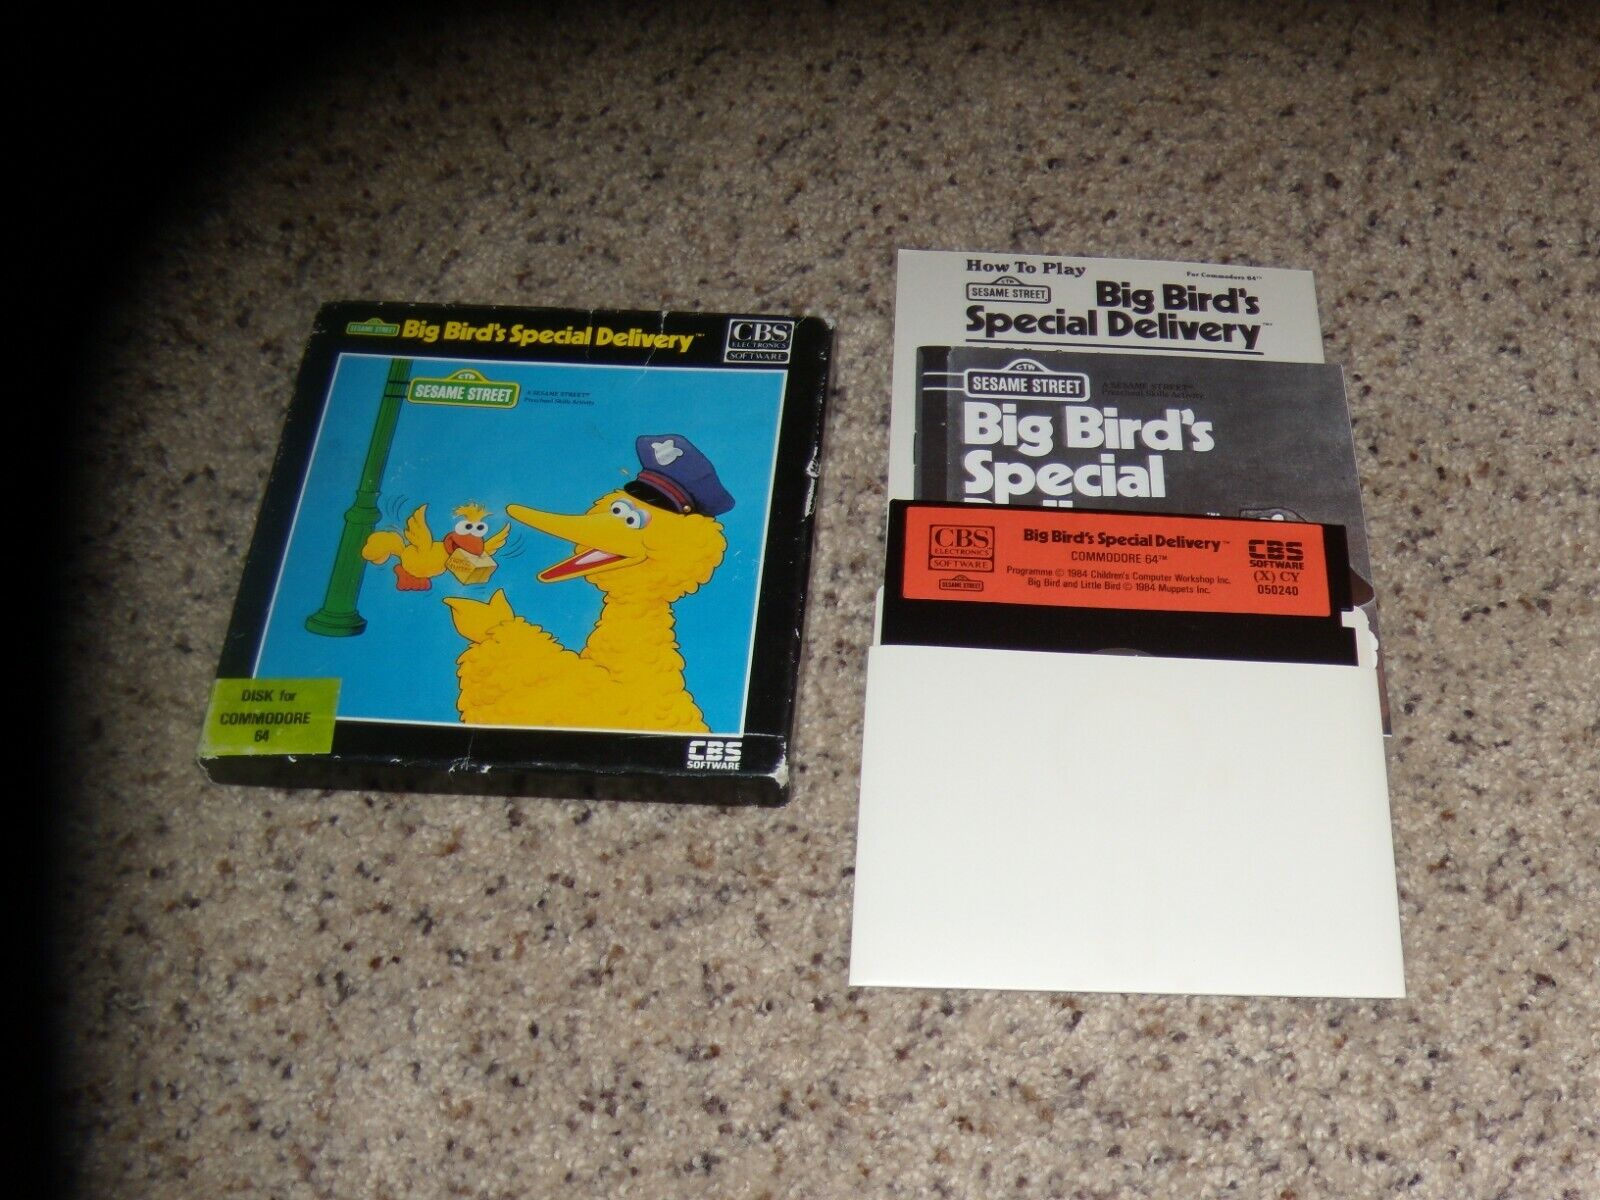 Big Bird's Special Delivery Commodore 64 C64 Game with manual and box